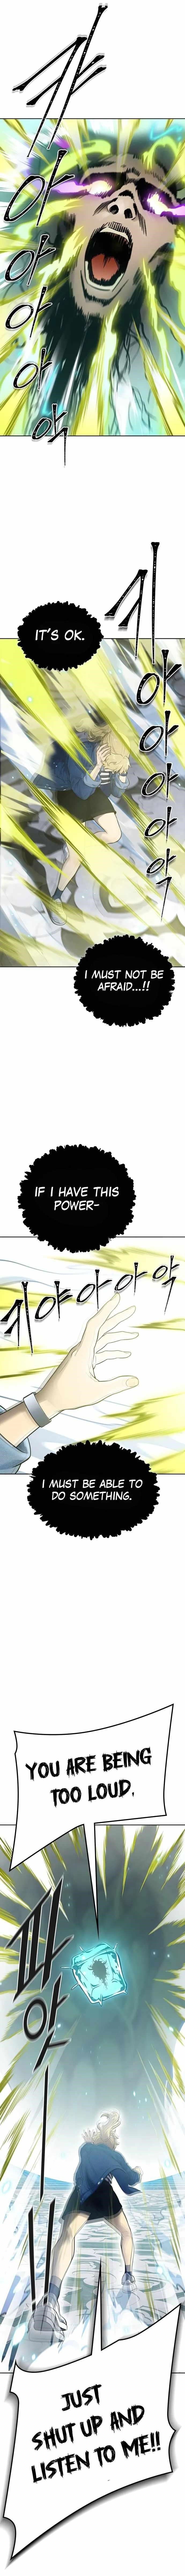 Tower of God Chapter 603 - Page 16